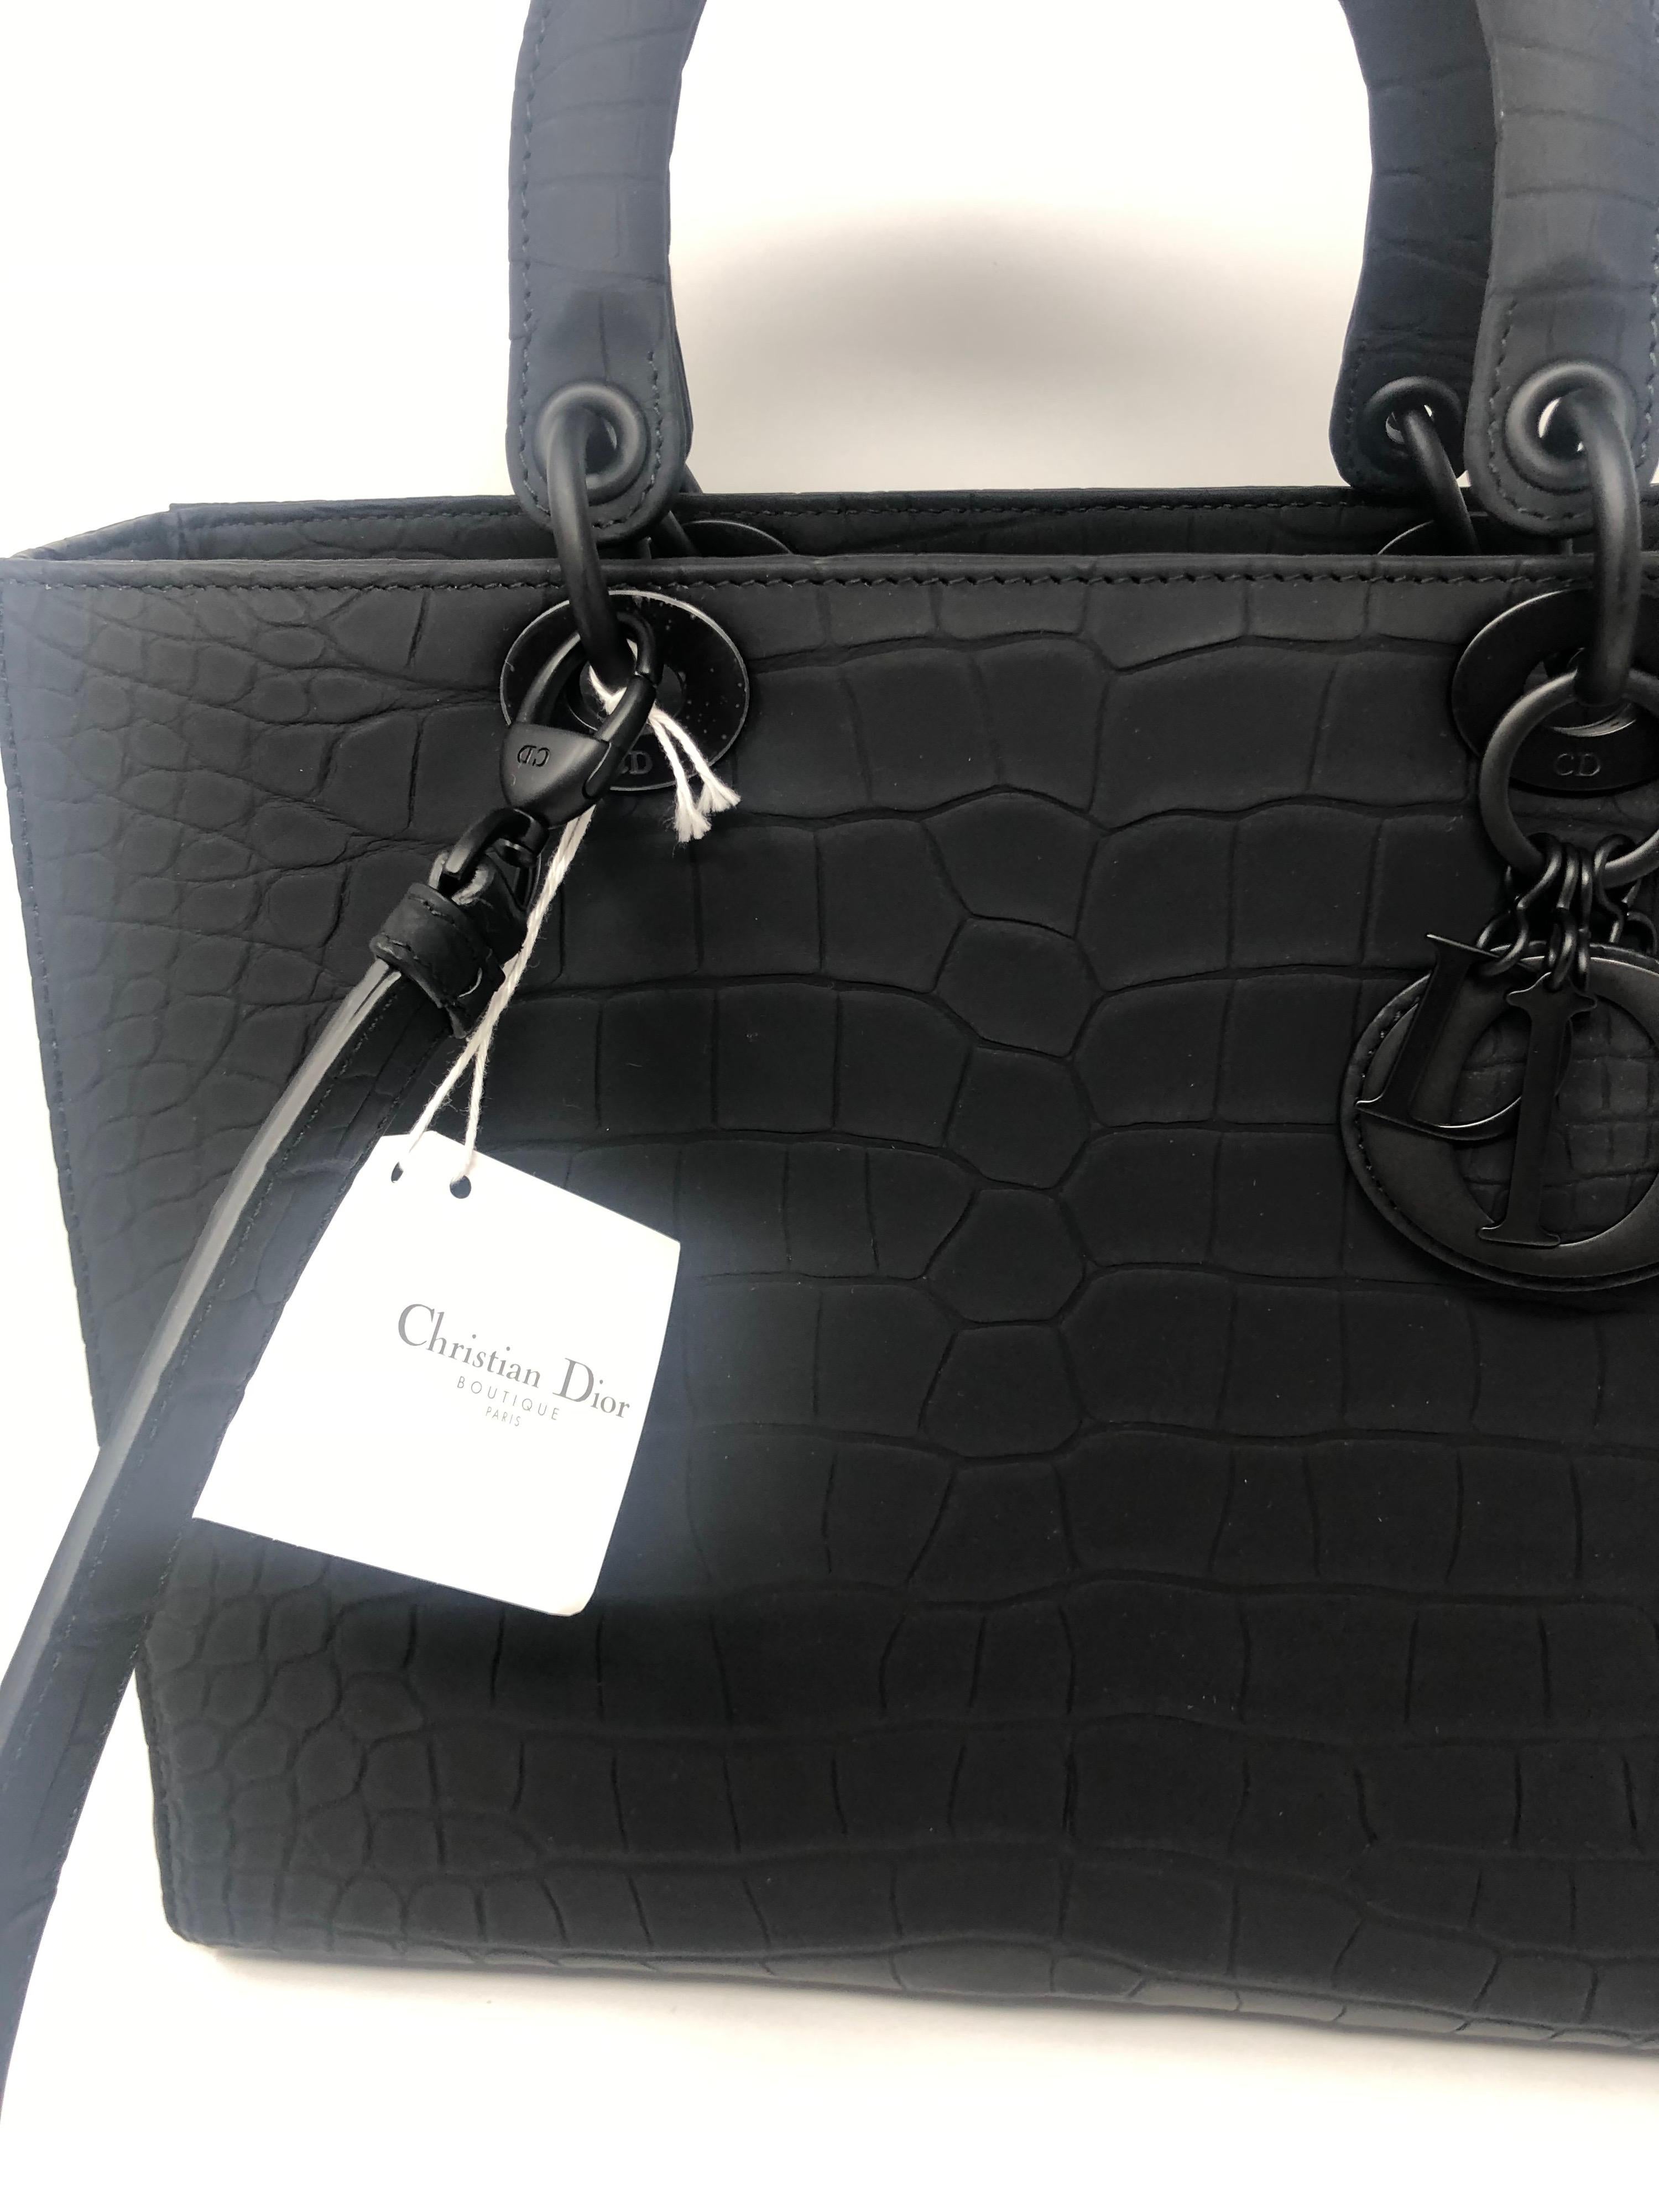 Christian Dior Black Alligator Bag. Lady Dior Bag large size with strap. Brand new. Retail over $45,000. Never used. Rare exotic leather with paperwork included. Original tags from Dior and dust cover. Don't miss out on this opportunity to own this